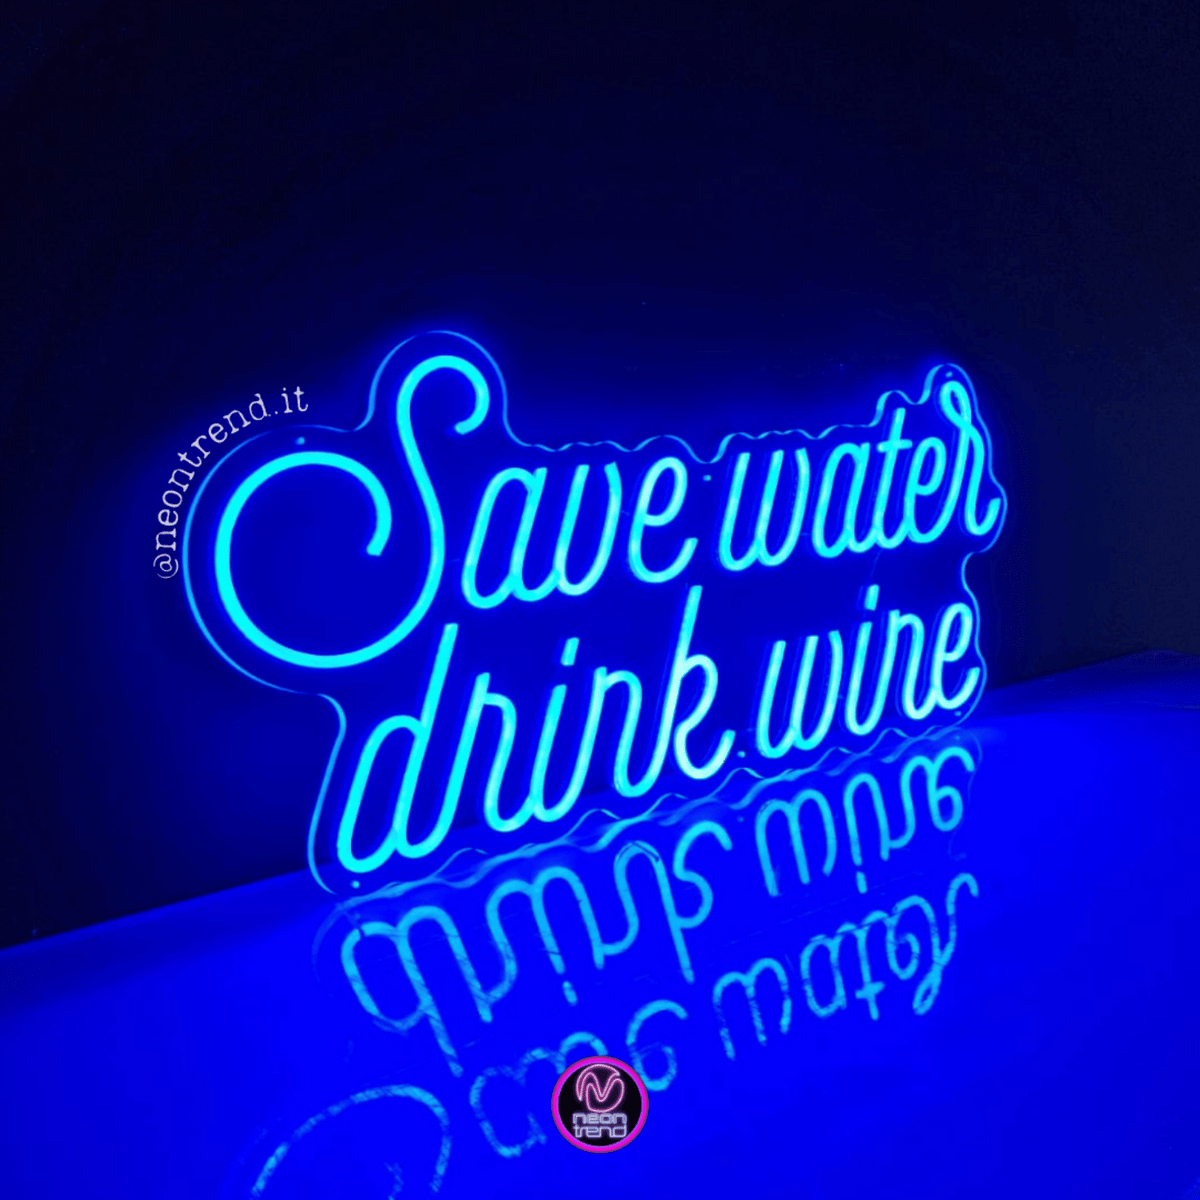 Save water drink wine